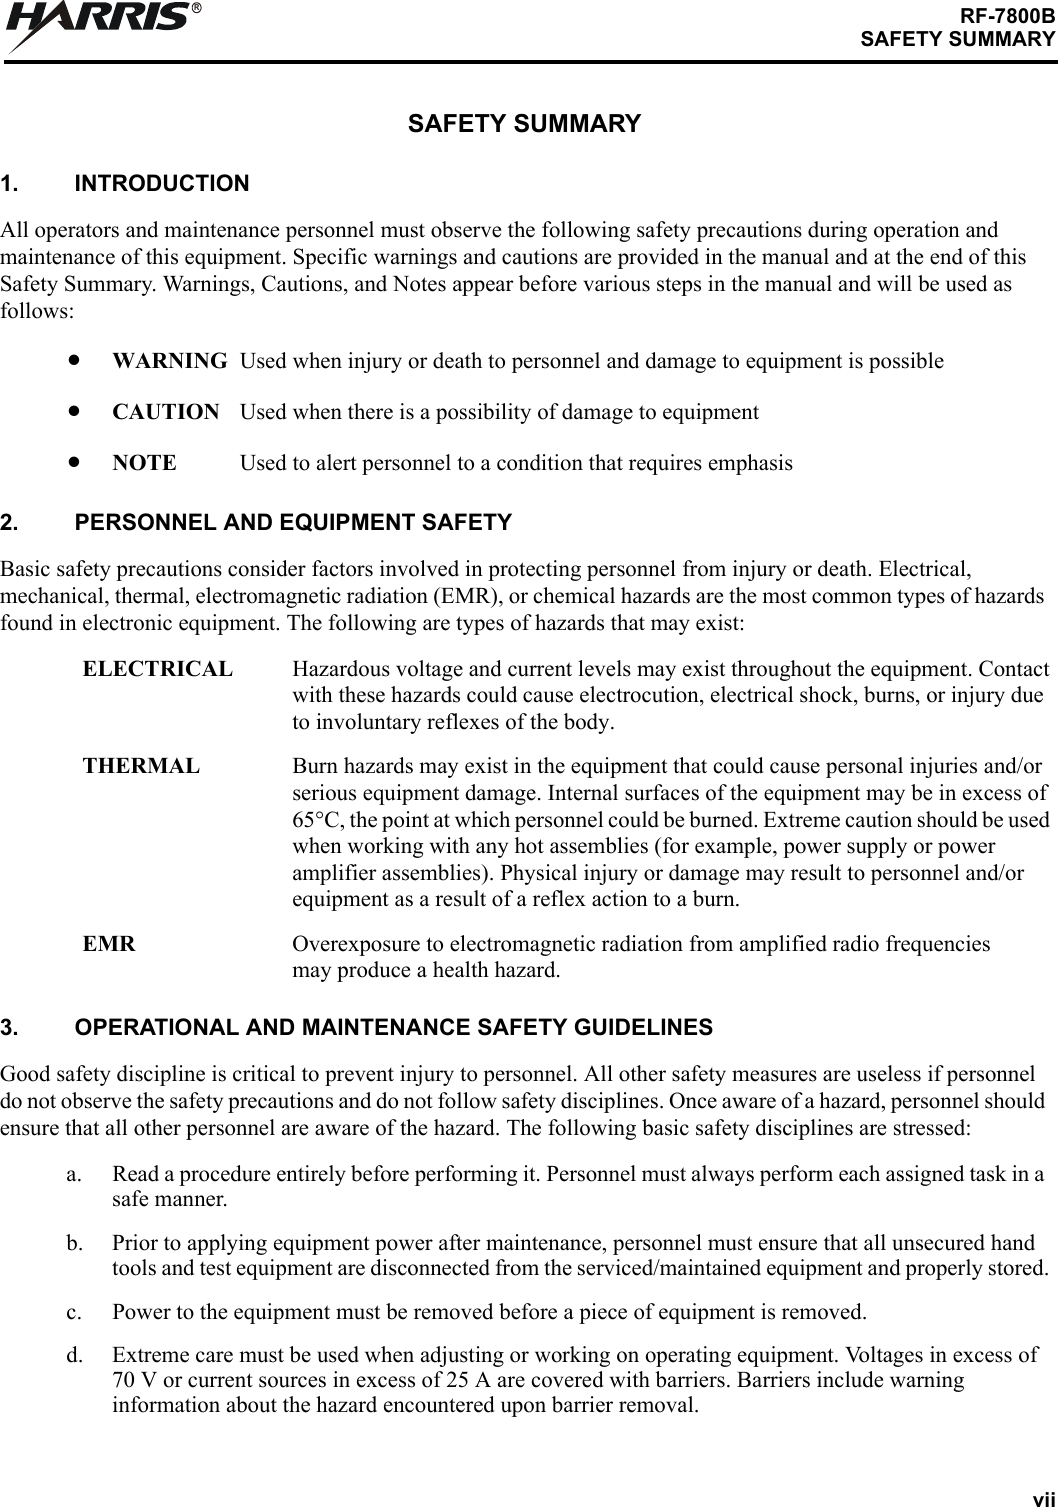 viiRF-7800BSAFETY SUMMARYRSAFETY SUMMARY1. INTRODUCTIONAll operators and maintenance personnel must observe the following safety precautions during operation and maintenance of this equipment. Specific warnings and cautions are provided in the manual and at the end of this Safety Summary. Warnings, Cautions, and Notes appear before various steps in the manual and will be used as follows:WARNING Used when injury or death to personnel and damage to equipment is possibleCAUTION Used when there is a possibility of damage to equipmentNOTE Used to alert personnel to a condition that requires emphasis2. PERSONNEL AND EQUIPMENT SAFETYBasic safety precautions consider factors involved in protecting personnel from injury or death. Electrical, mechanical, thermal, electromagnetic radiation (EMR), or chemical hazards are the most common types of hazards found in electronic equipment. The following are types of hazards that may exist:ELECTRICAL Hazardous voltage and current levels may exist throughout the equipment. Contactwith these hazards could cause electrocution, electrical shock, burns, or injury due to involuntary reflexes of the body.THERMAL Burn hazards may exist in the equipment that could cause personal injuries and/orserious equipment damage. Internal surfaces of the equipment may be in excess of65C, the point at which personnel could be burned. Extreme caution should be usedwhen working with any hot assemblies (for example, power supply or poweramplifier assemblies). Physical injury or damage may result to personnel and/orequipment as a result of a reflex action to a burn.EMR Overexposure to electromagnetic radiation from amplified radio frequenciesmay produce a health hazard.3. OPERATIONAL AND MAINTENANCE SAFETY GUIDELINESGood safety discipline is critical to prevent injury to personnel. All other safety measures are useless if personnel do not observe the safety precautions and do not follow safety disciplines. Once aware of a hazard, personnel should ensure that all other personnel are aware of the hazard. The following basic safety disciplines are stressed:a. Read a procedure entirely before performing it. Personnel must always perform each assigned task in a safe manner.b. Prior to applying equipment power after maintenance, personnel must ensure that all unsecured hand tools and test equipment are disconnected from the serviced/maintained equipment and properly stored.c. Power to the equipment must be removed before a piece of equipment is removed.d. Extreme care must be used when adjusting or working on operating equipment. Voltages in excess of 70 V or current sources in excess of 25 A are covered with barriers. Barriers include warning information about the hazard encountered upon barrier removal.